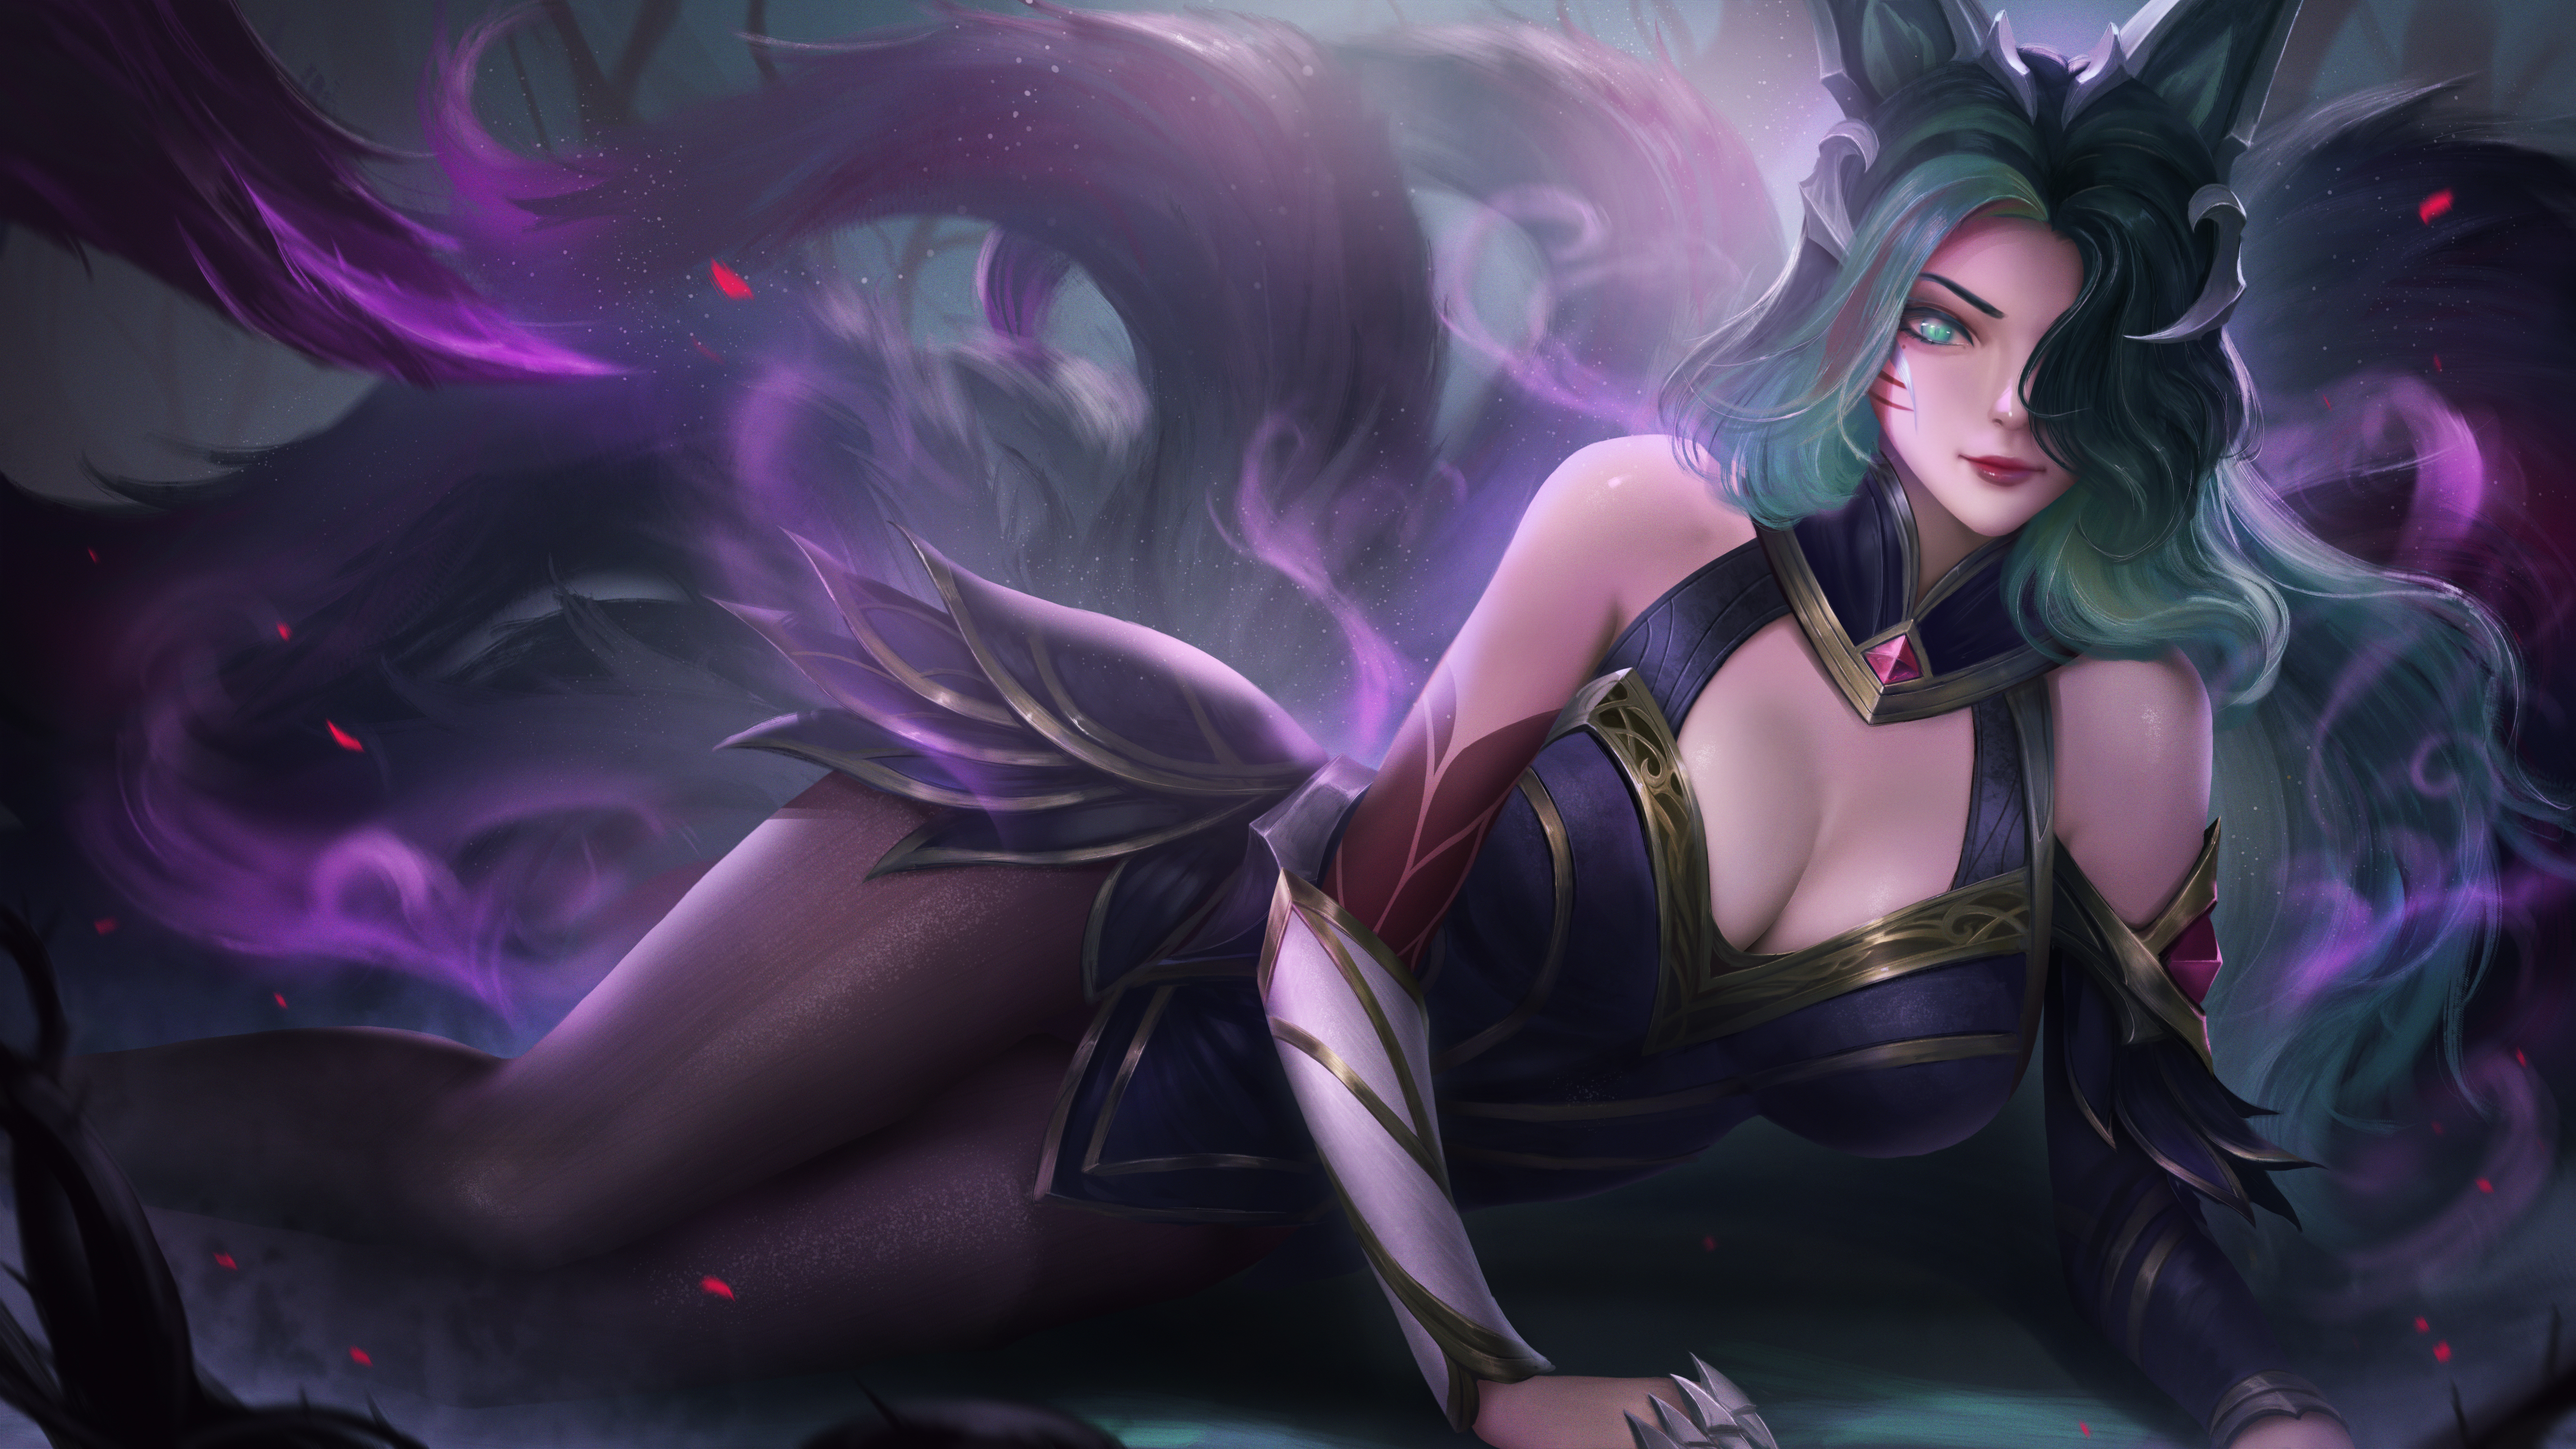 General 5476x3080 Ahri (League of Legends) League of Legends video games video game girls looking at viewer fox girl nine tails cleavage dress pantyhose arm support fantasy girl fantasy art video game characters 2D artwork drawing illustration fan art Windwalker Ture